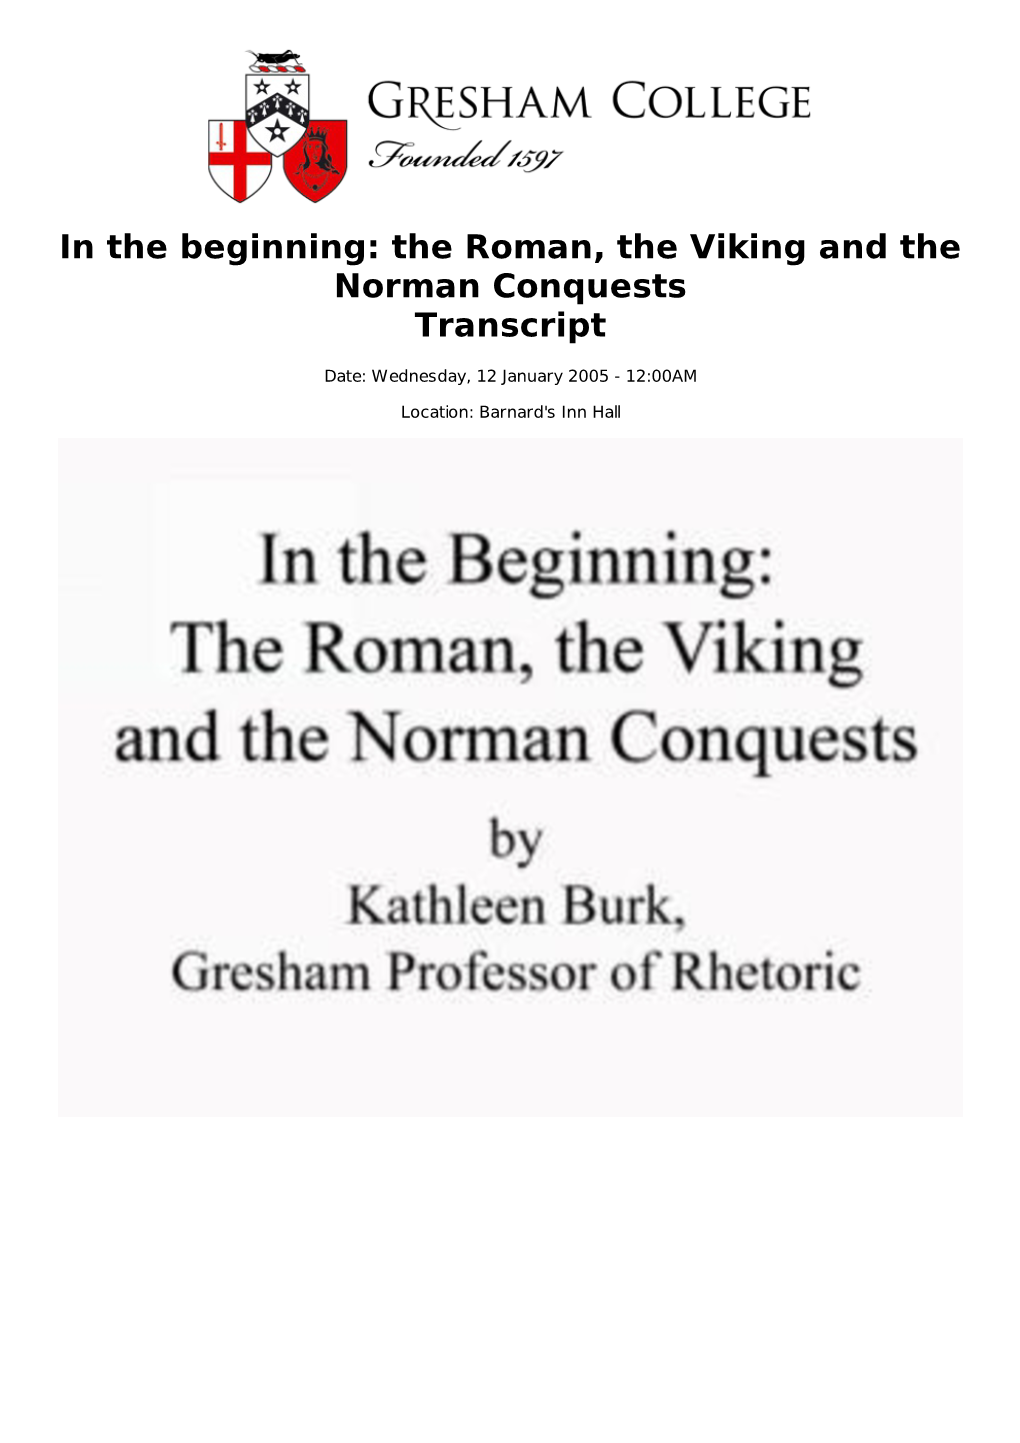 The Roman, the Viking and the Norman Conquests Transcript